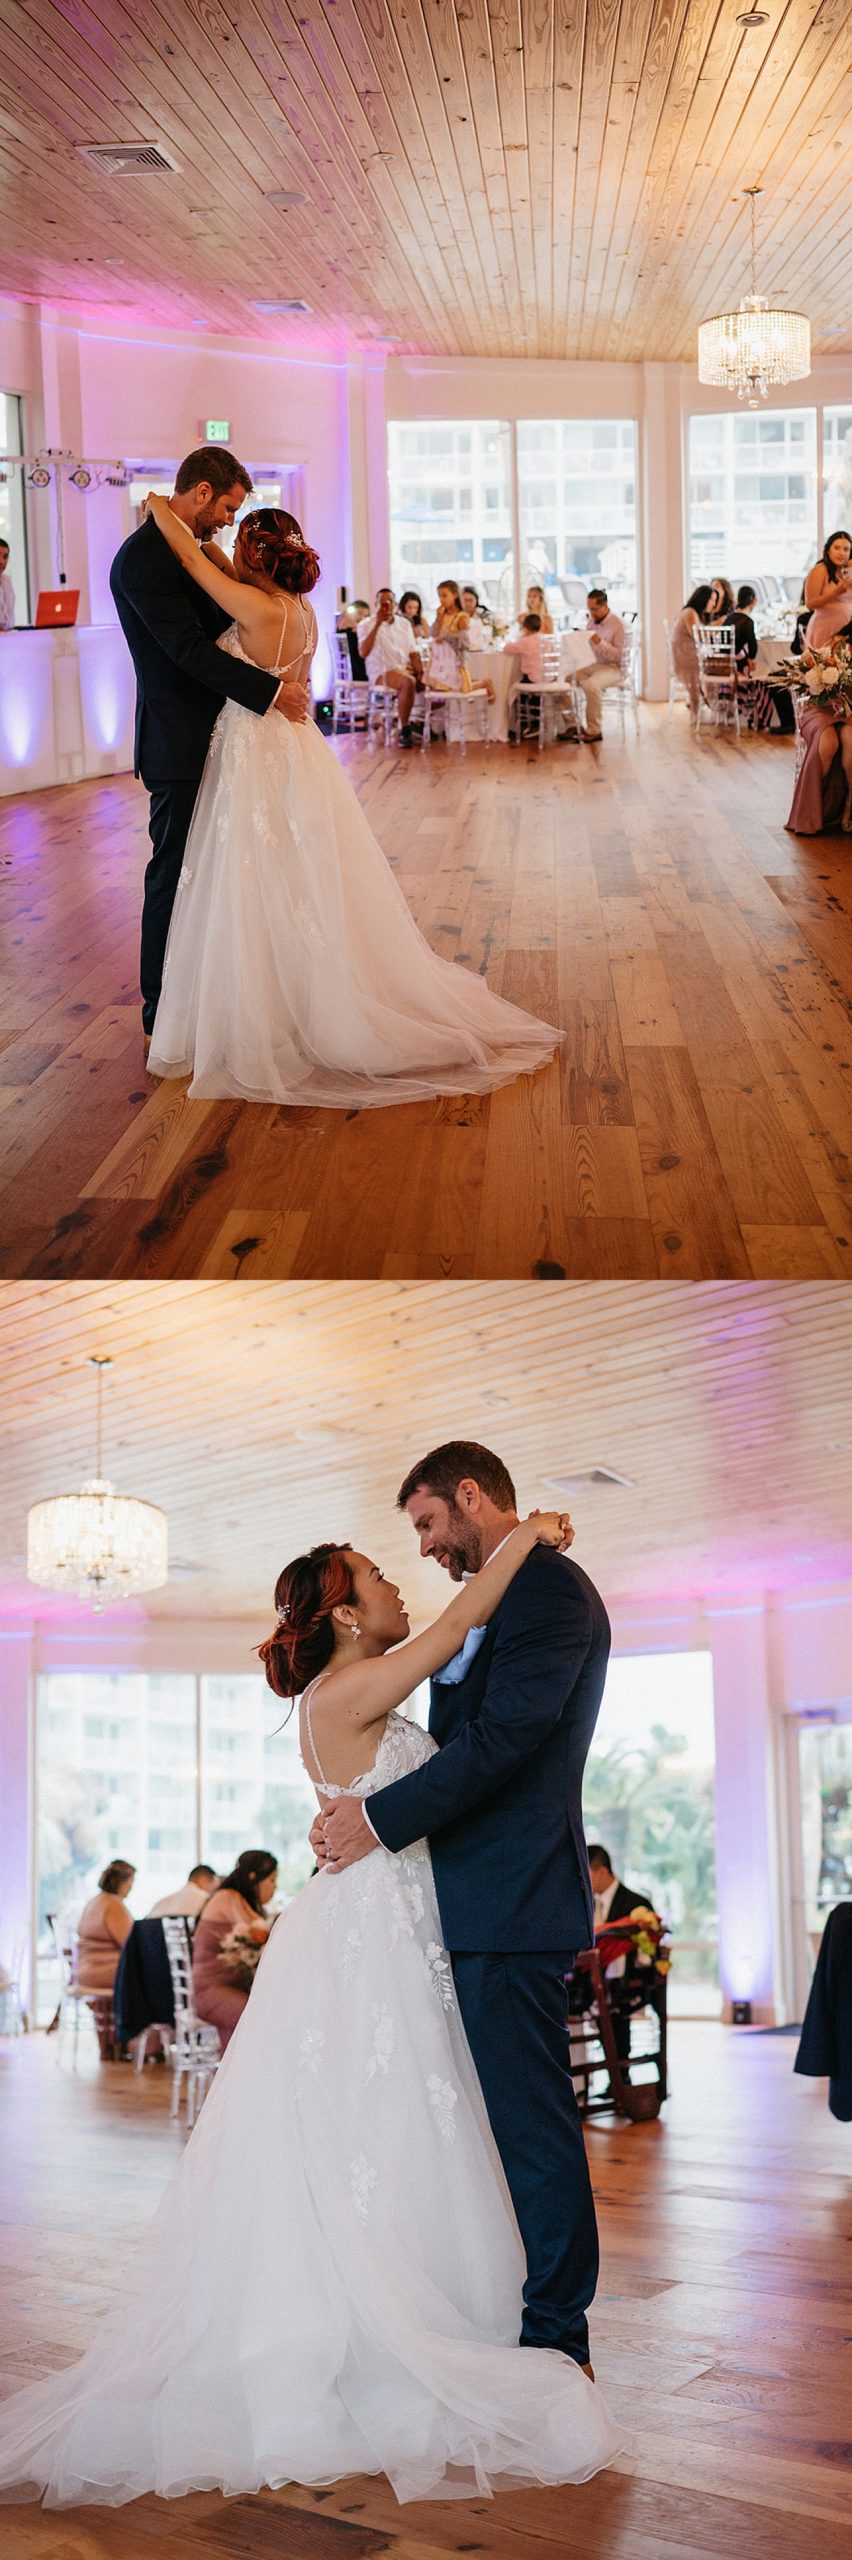 Bride and groom share first dance at wedding reception at the island resort